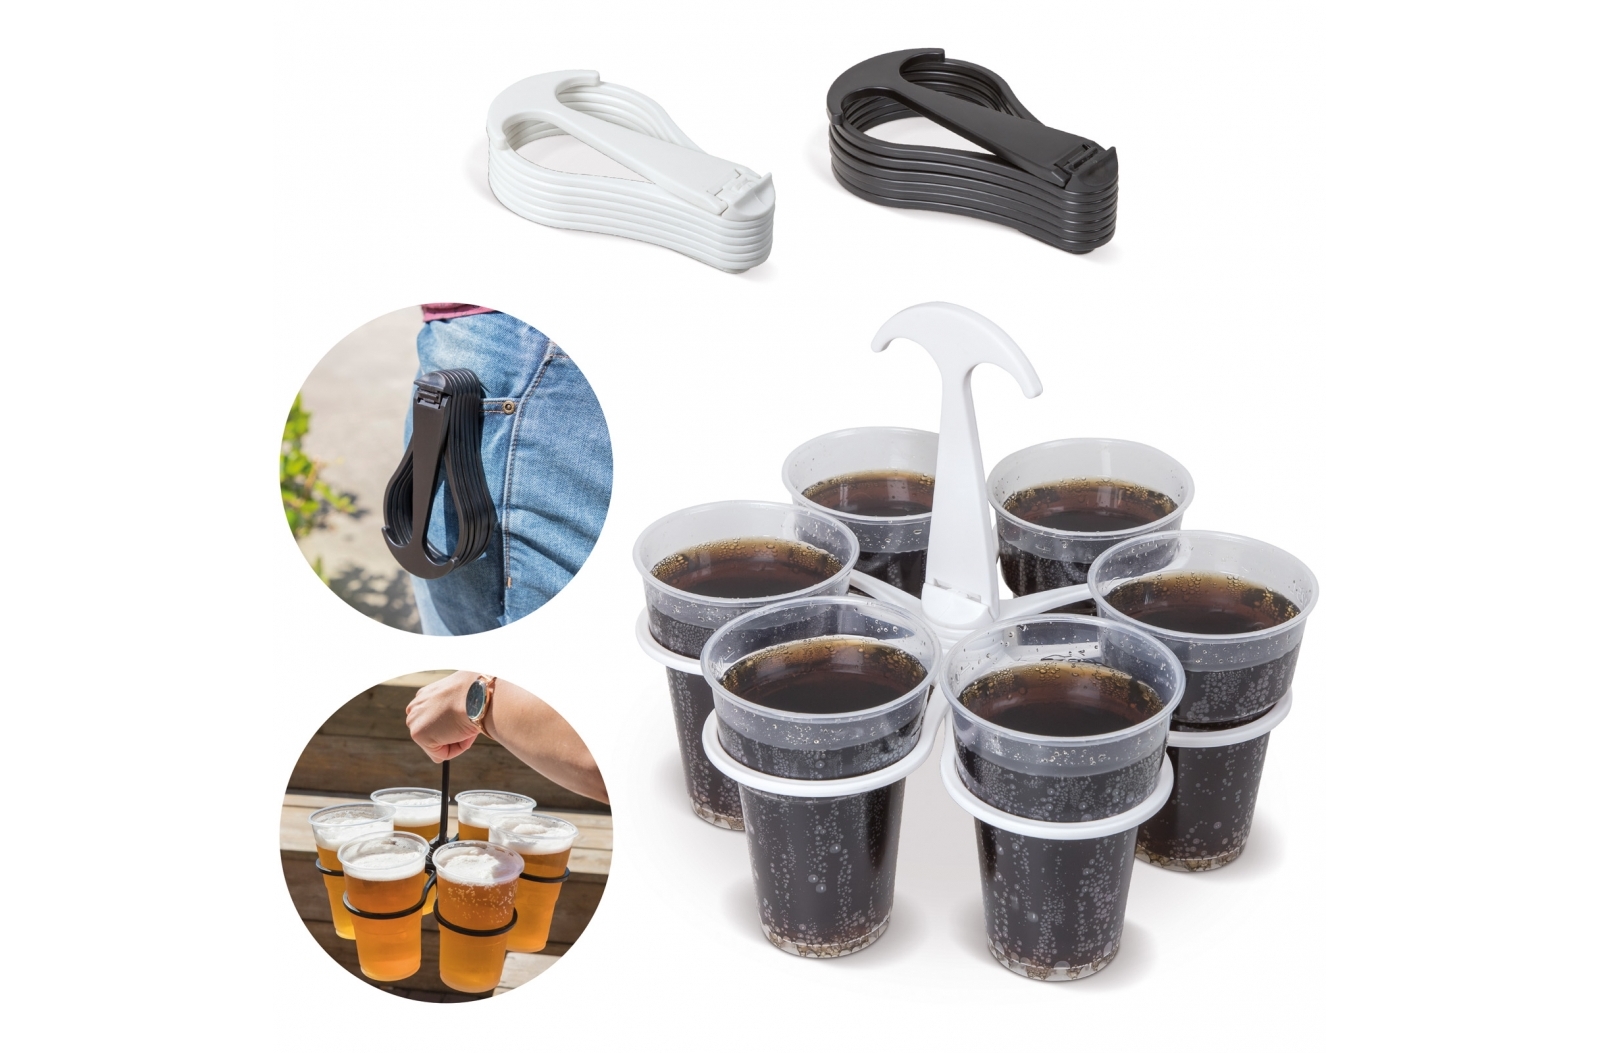 A collapsible carrier that can hold up to six cups - High Halden